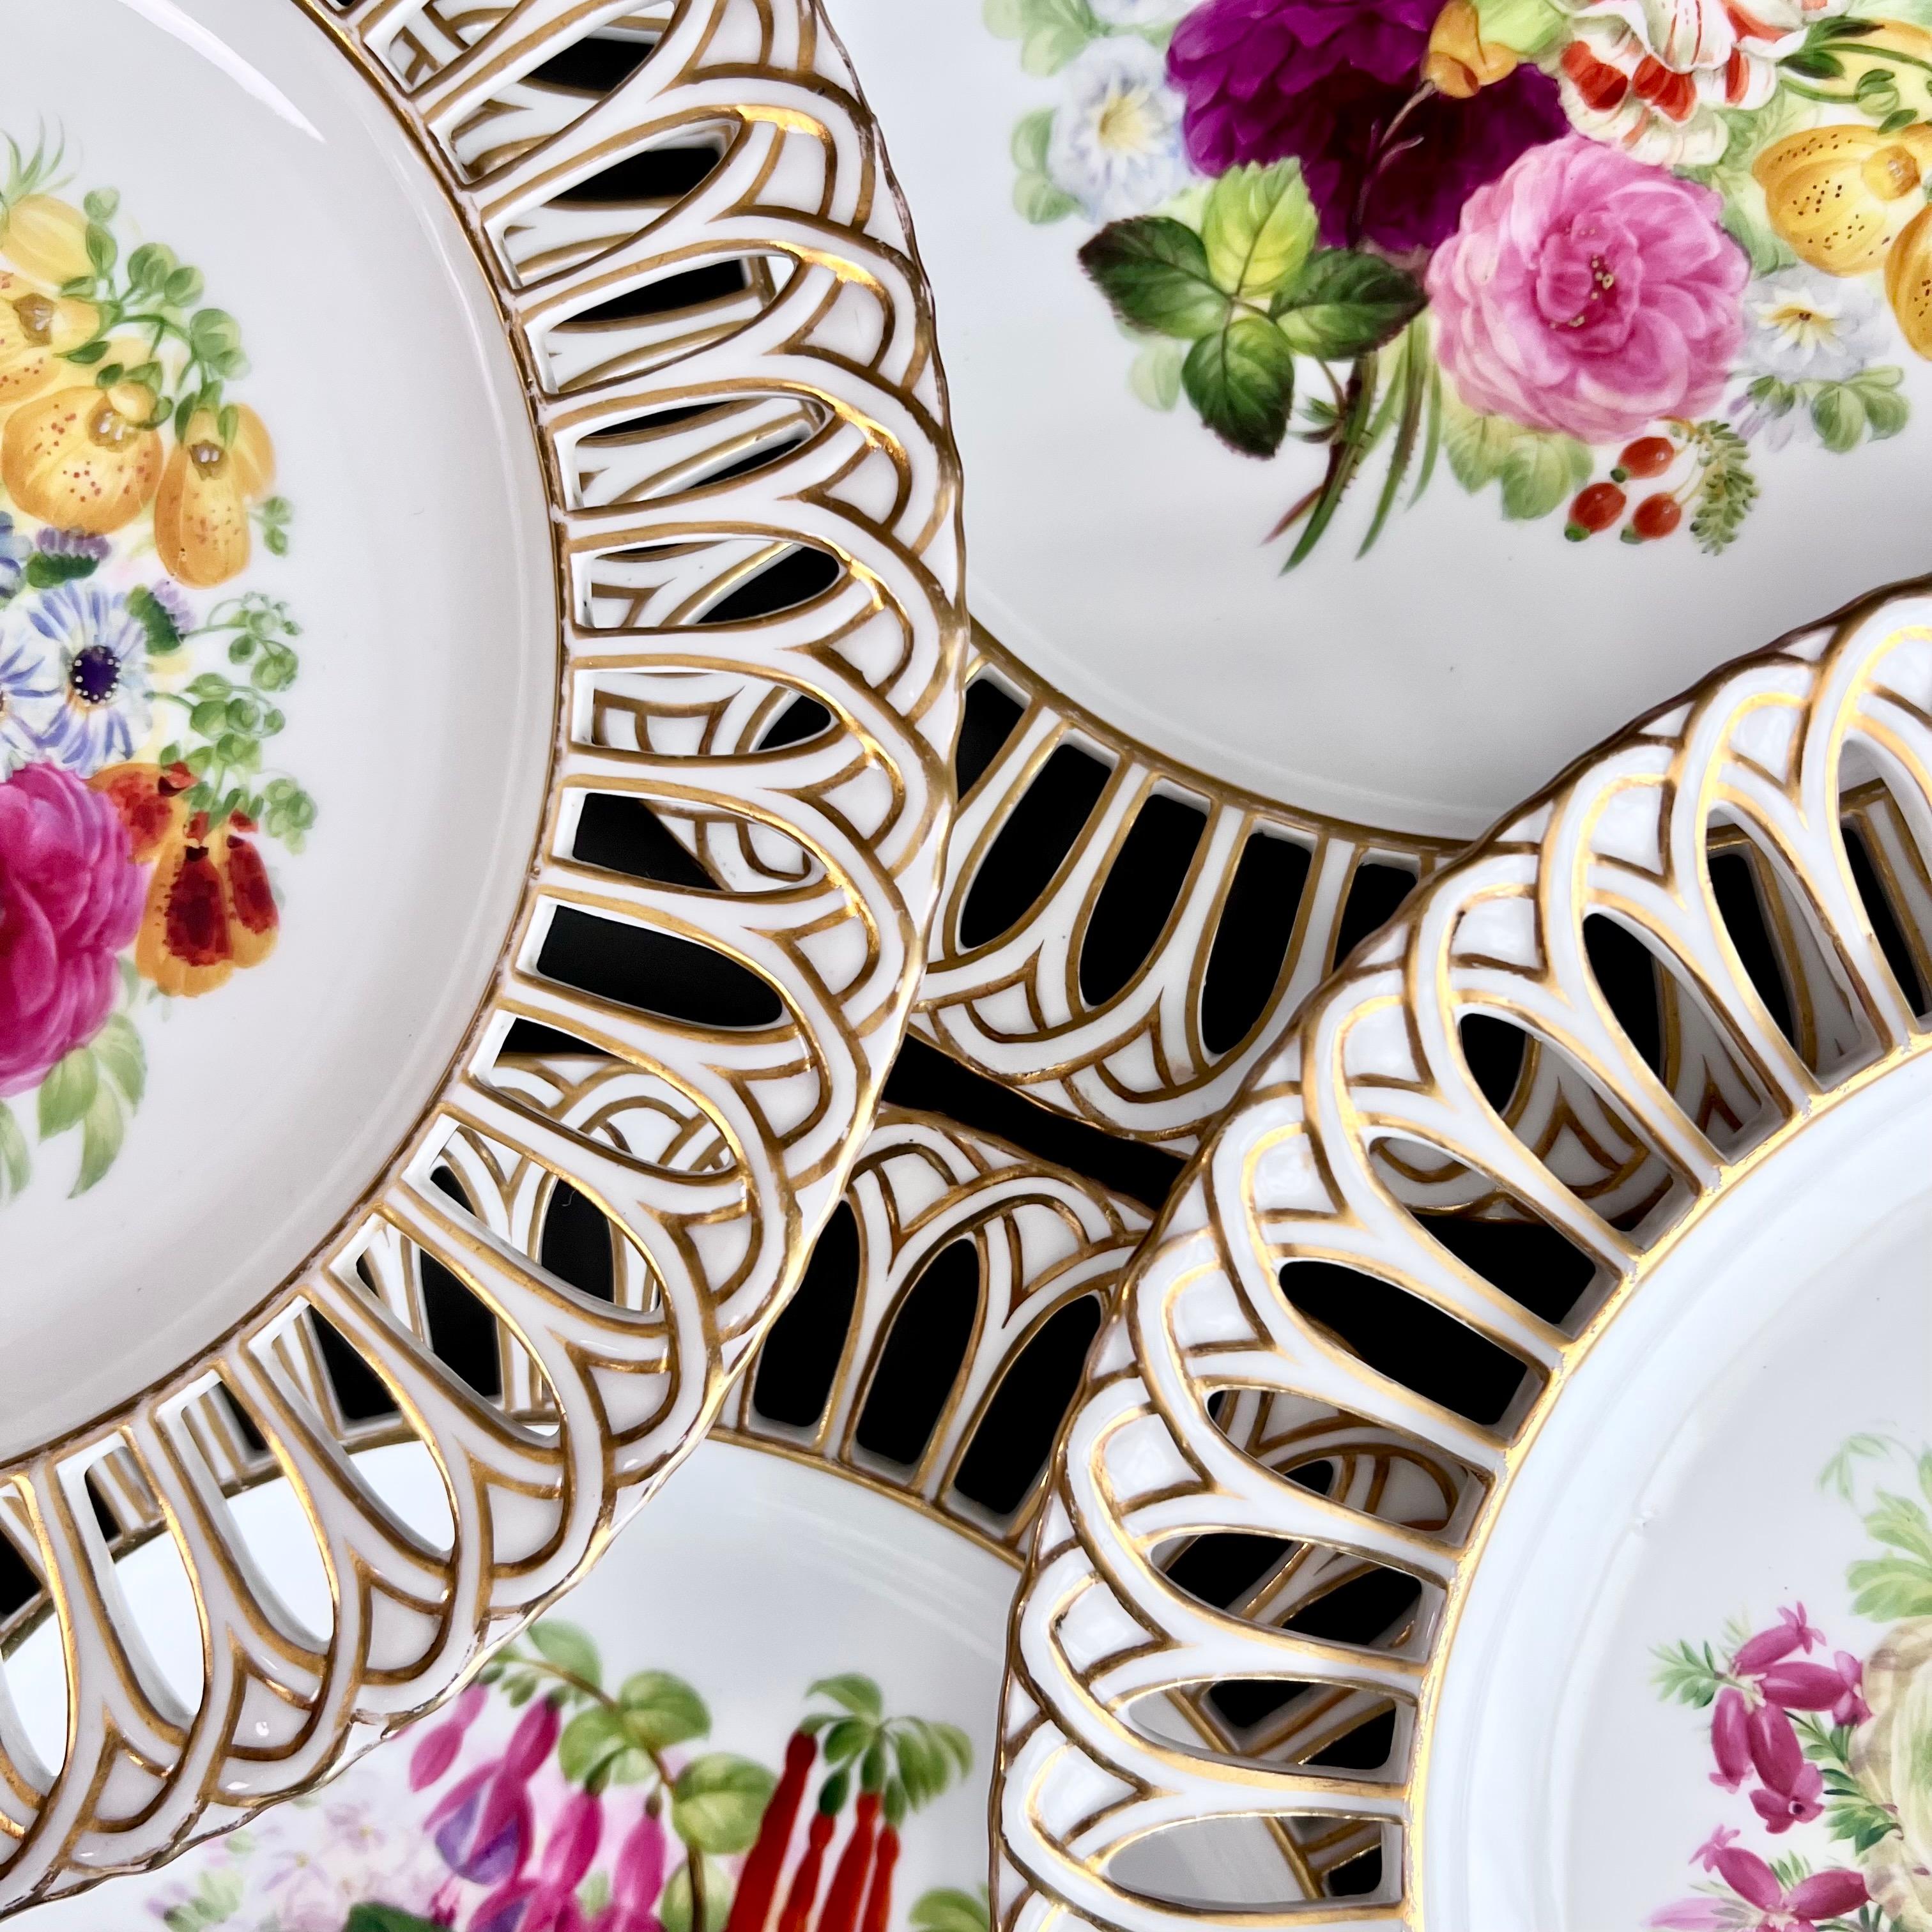 Victorian Set of 8 Plates by Copeland, Reticulated, Sublime Flowers by Greatbatch, 1848 For Sale